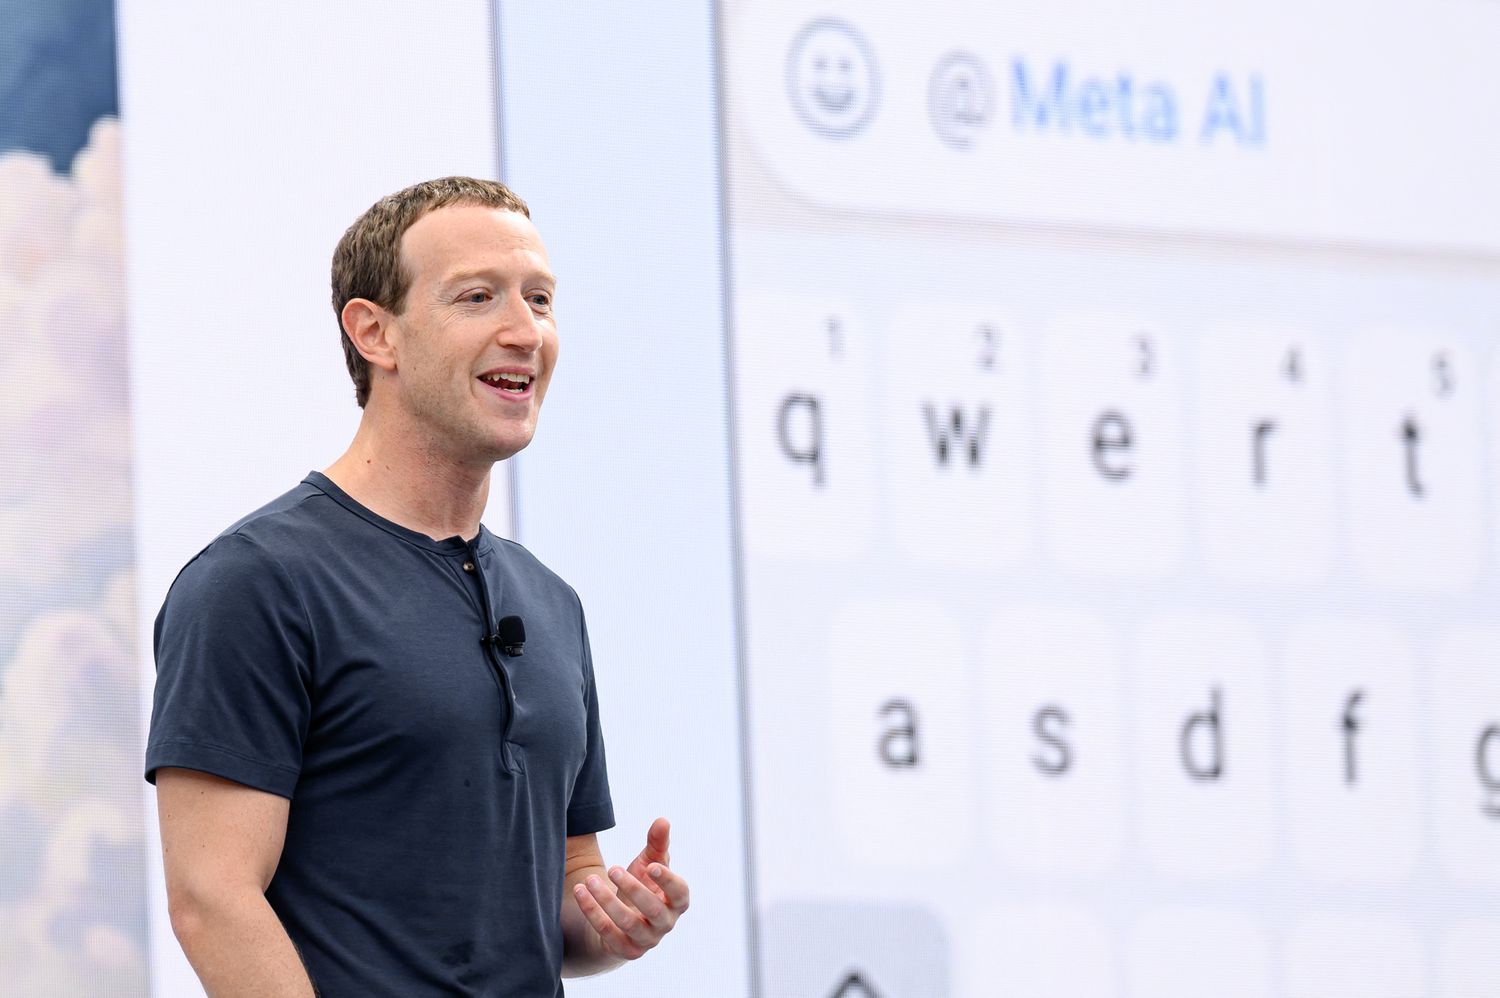 4 Key Takeaways From Mark Zuckerberg’s Comments During Meta’s Q1 Earnings Call [Video]